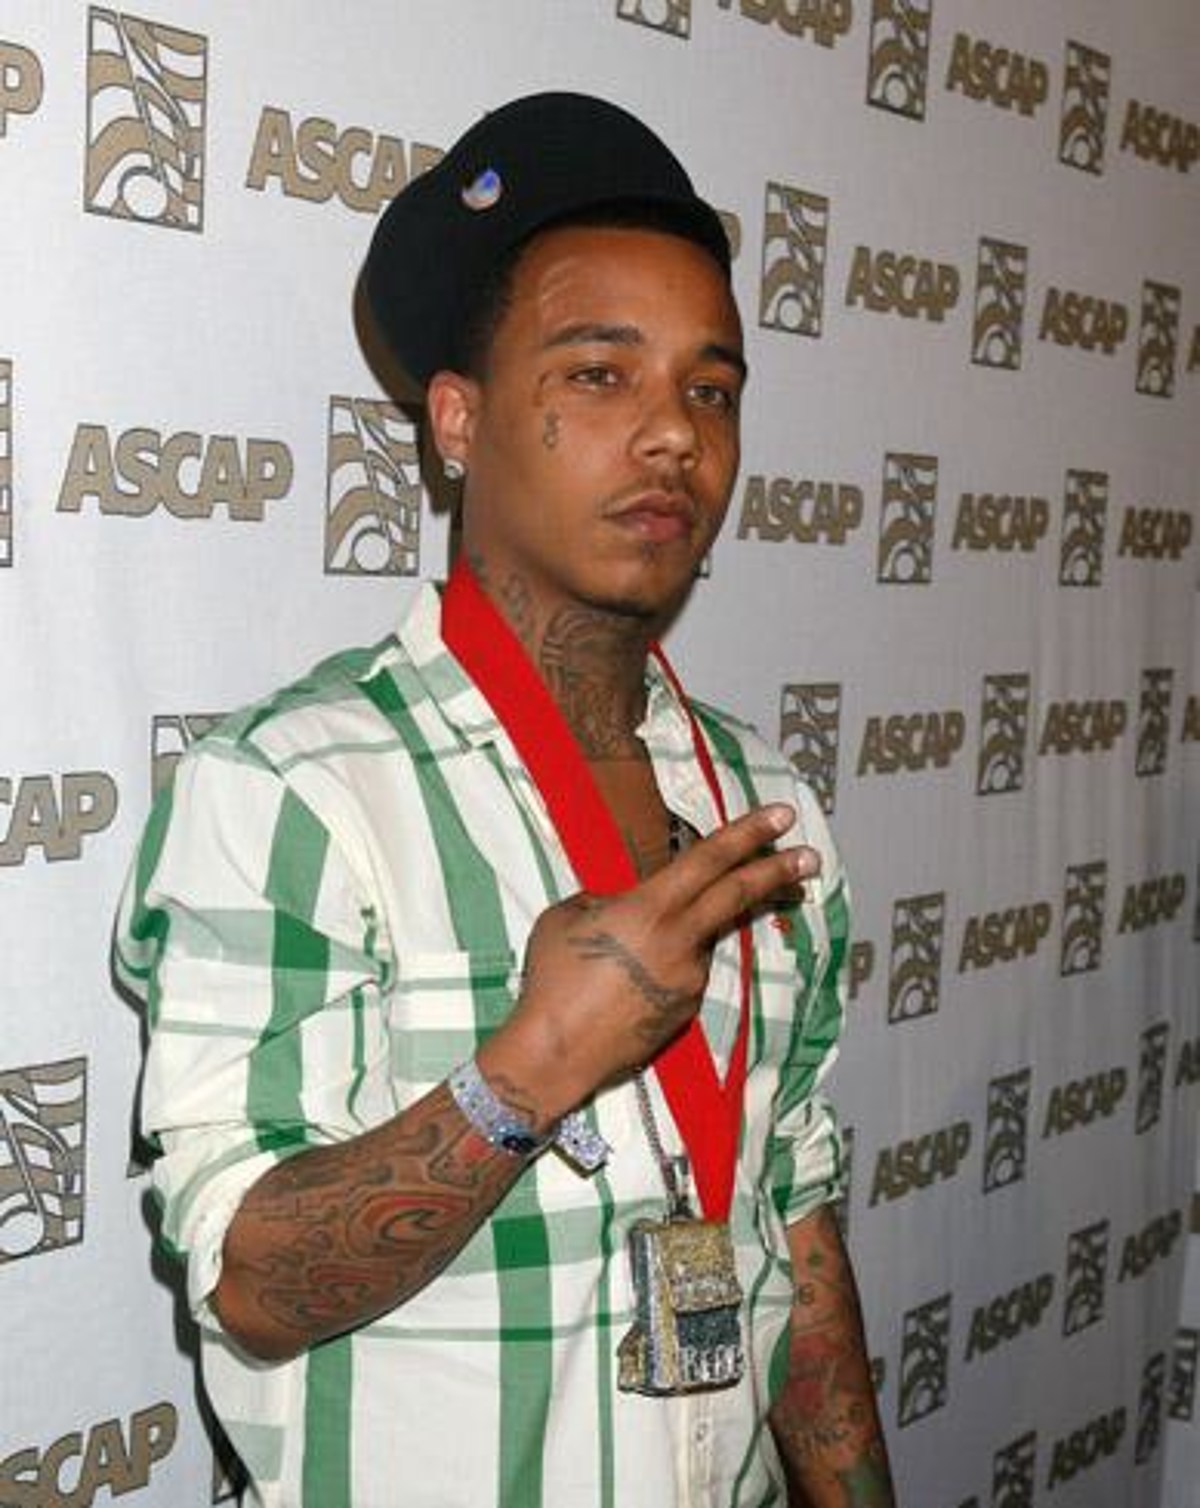 Yung Berg wearing a white shirt with green stripes